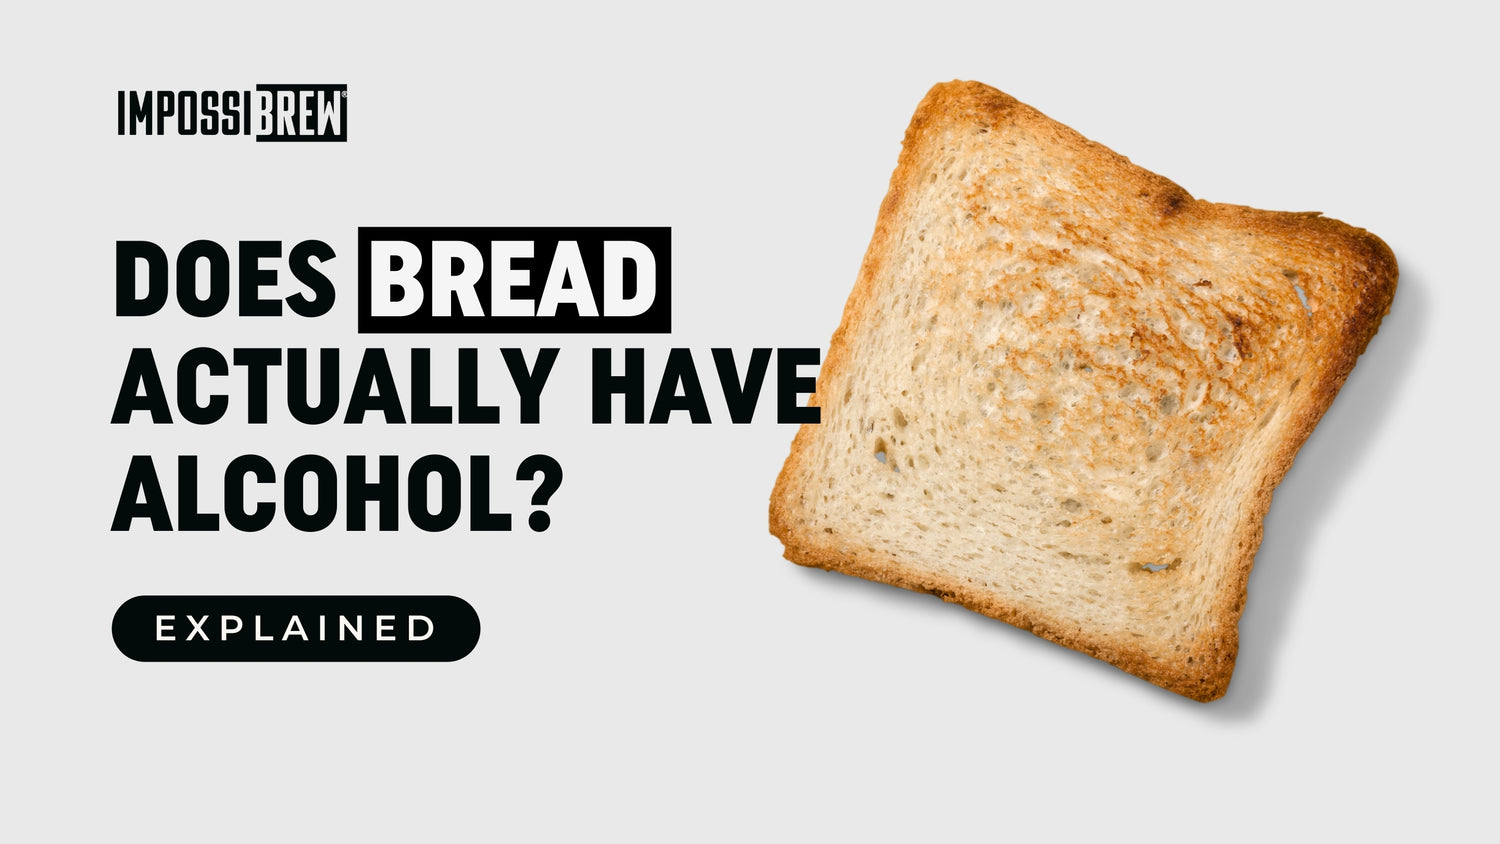 Does Bread Actually Have Alcohol?